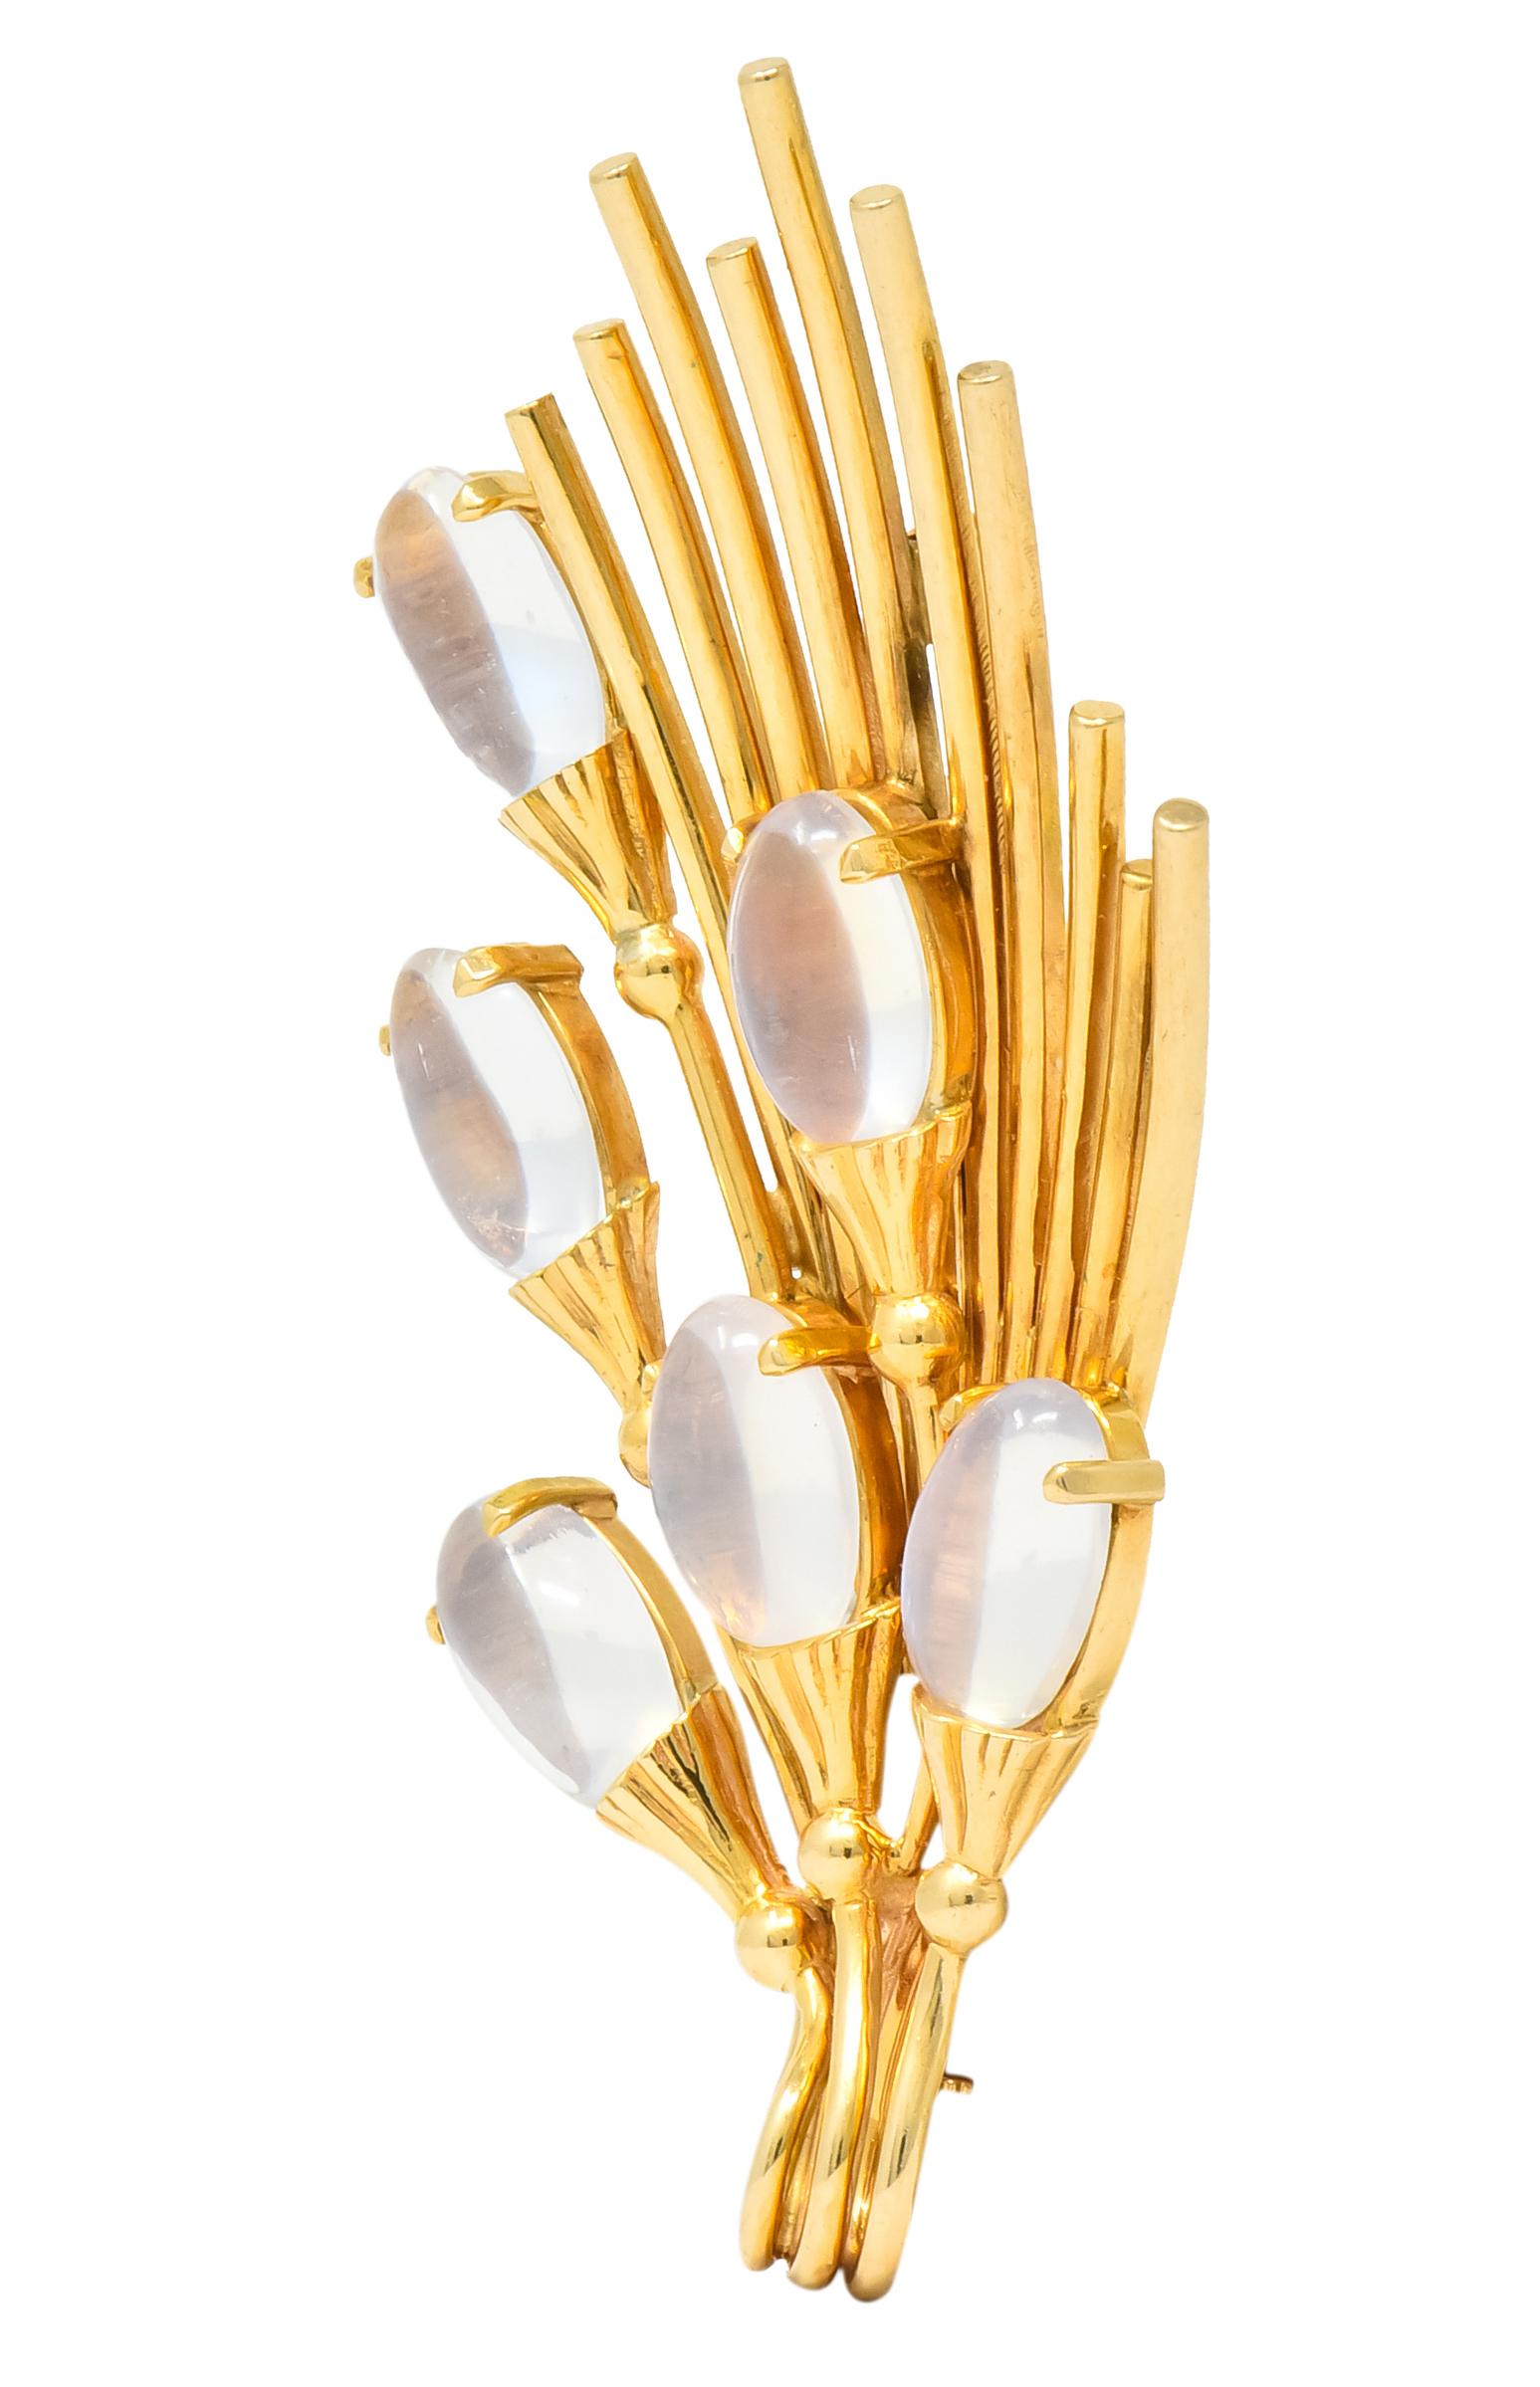 Brooch designed as cattail motif with linear stems that wind and terminate into oval cabochon moonstones

Moonstones measure approximately 9.5 x 6.0 mm, transparent with moderate white adularescence

Completed by pin stem and locking closure

Fully